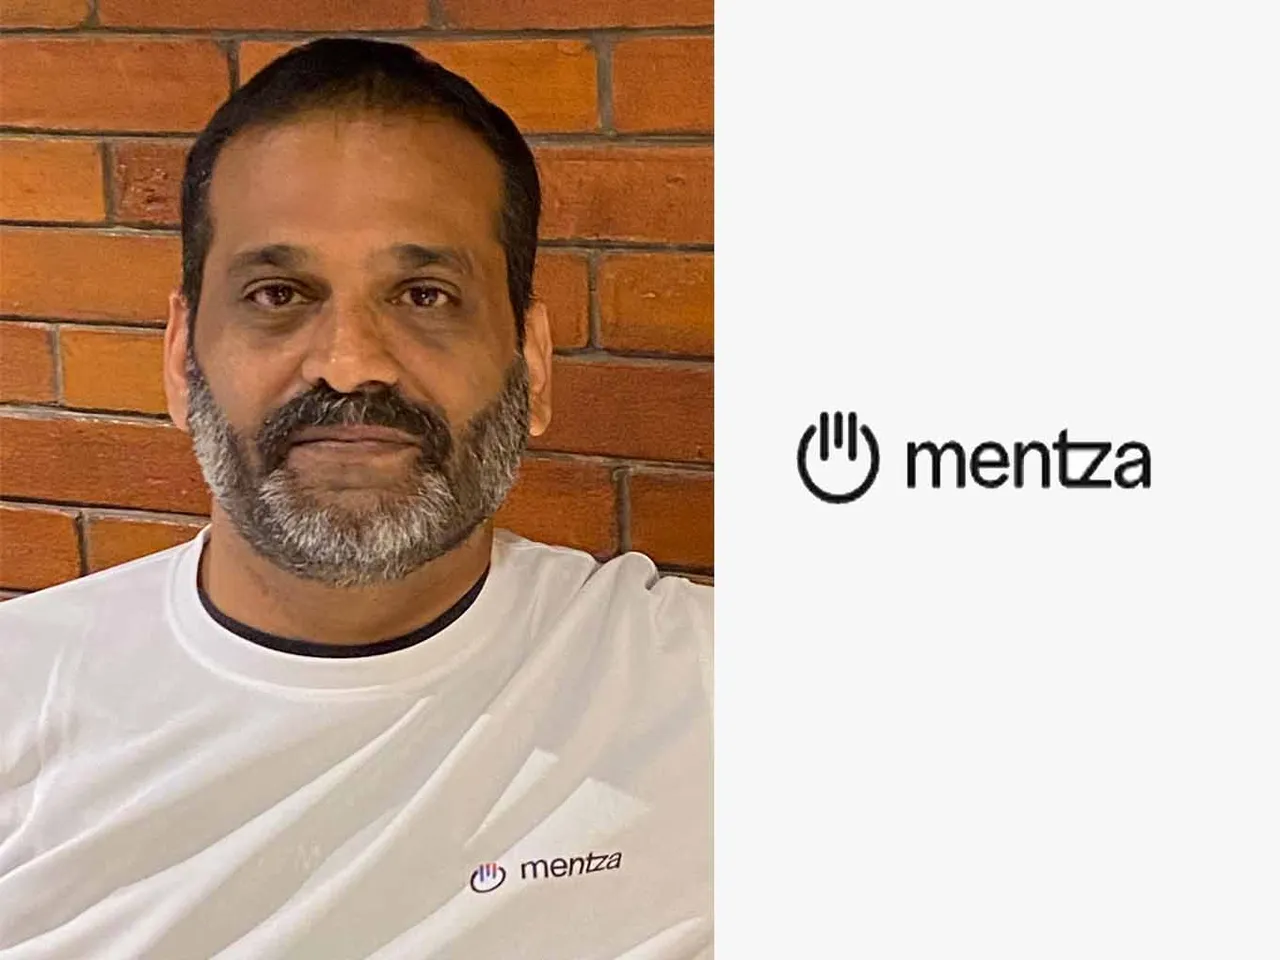 Conversational learning startup Mentza raises $400K in funding led by Inflection Point Ventures